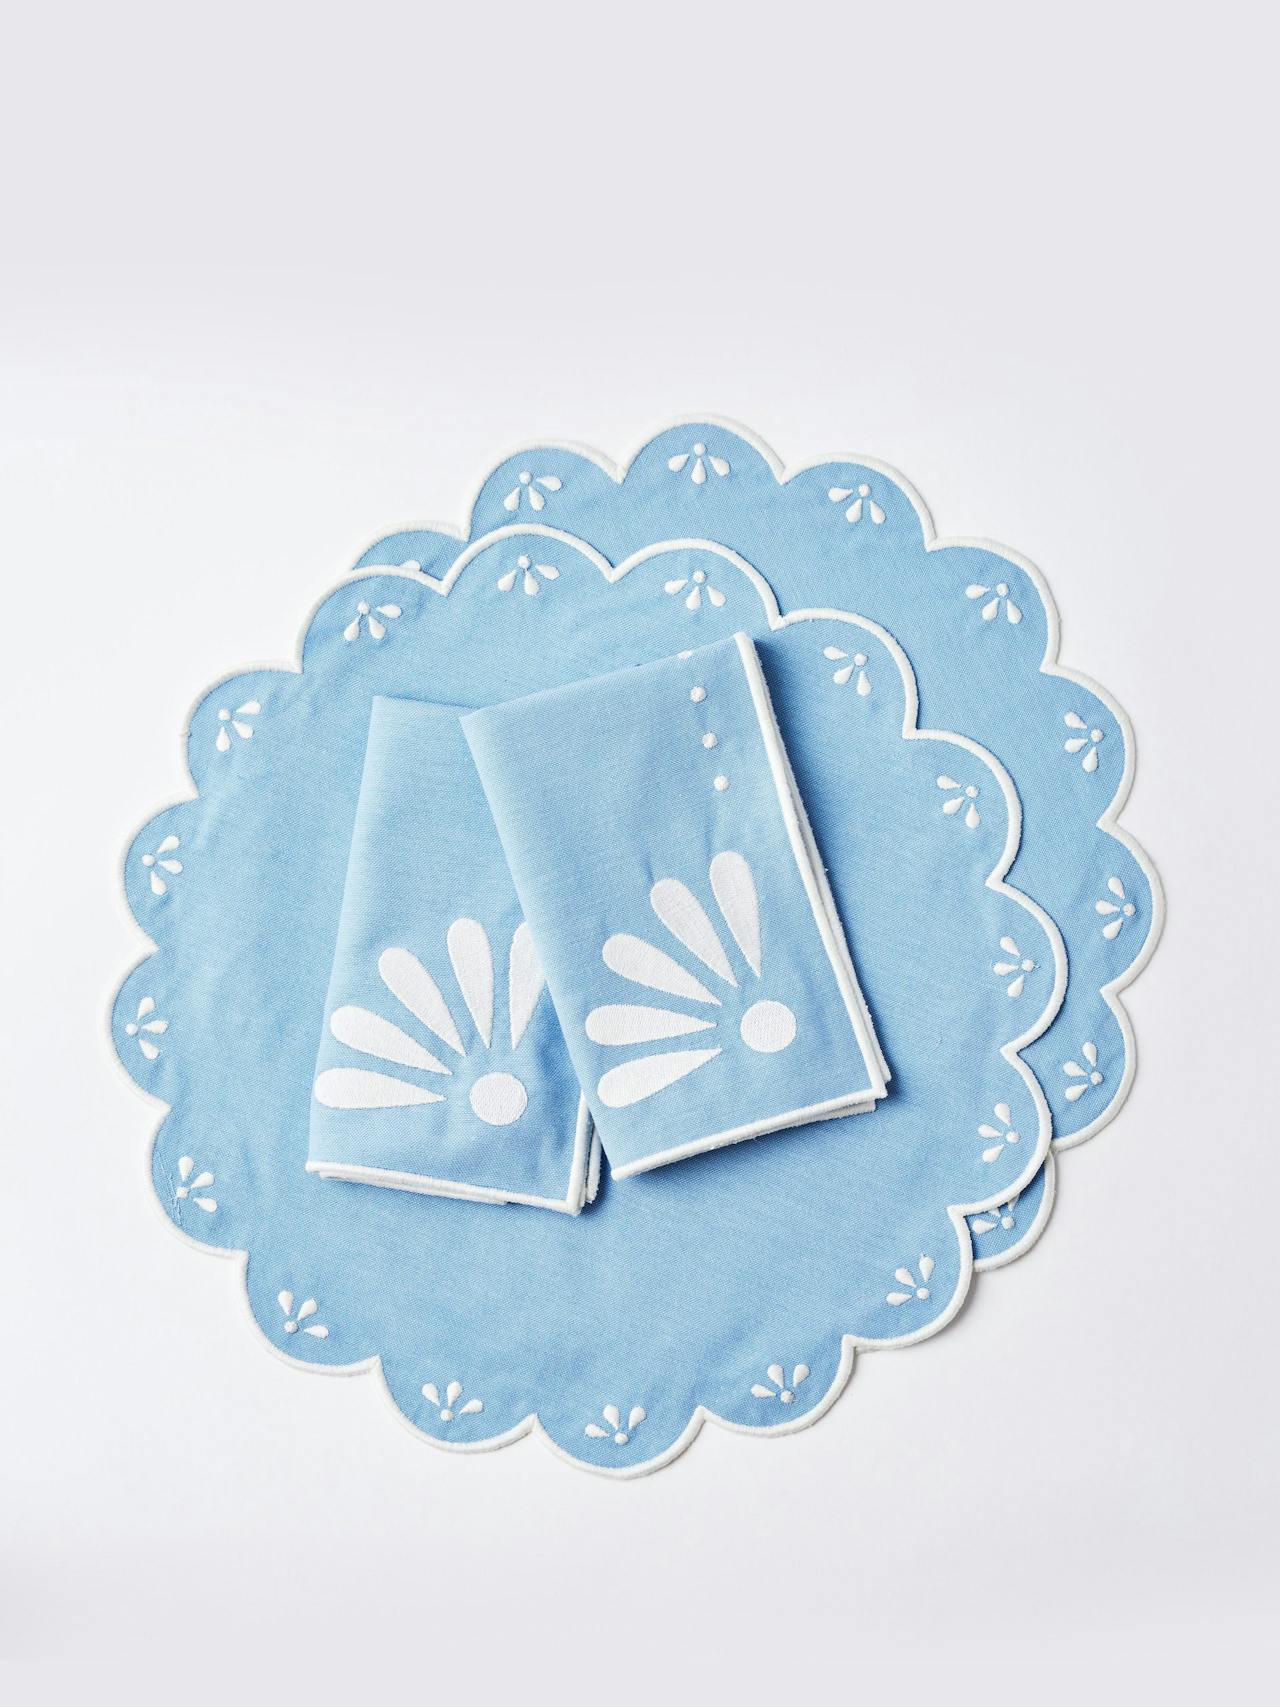 Peony blue placemats and napkins, set of 2